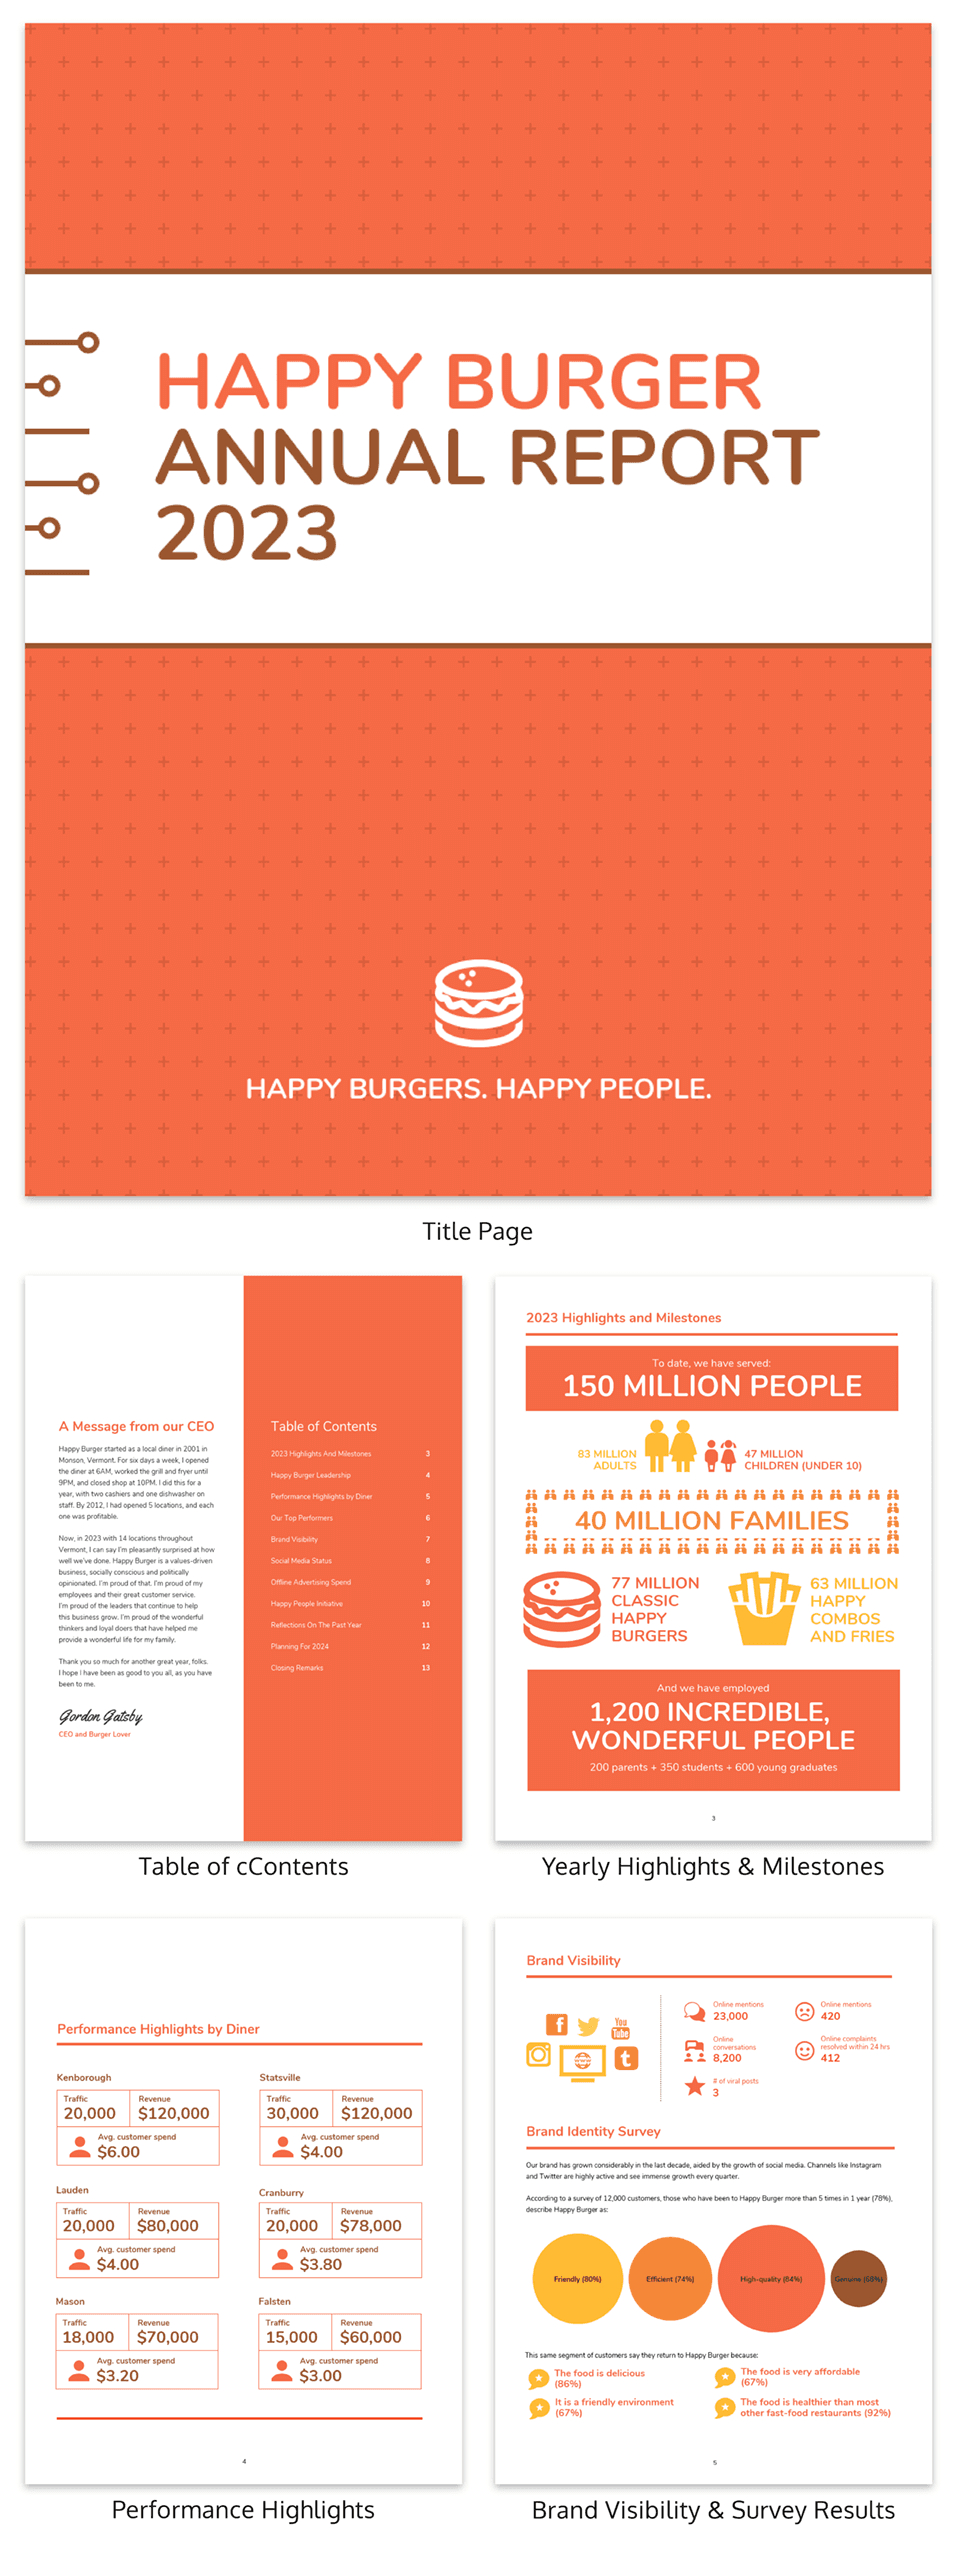 55+ Annual Report Design Templates & Inspirational Examples For Chairman's Annual Report Template